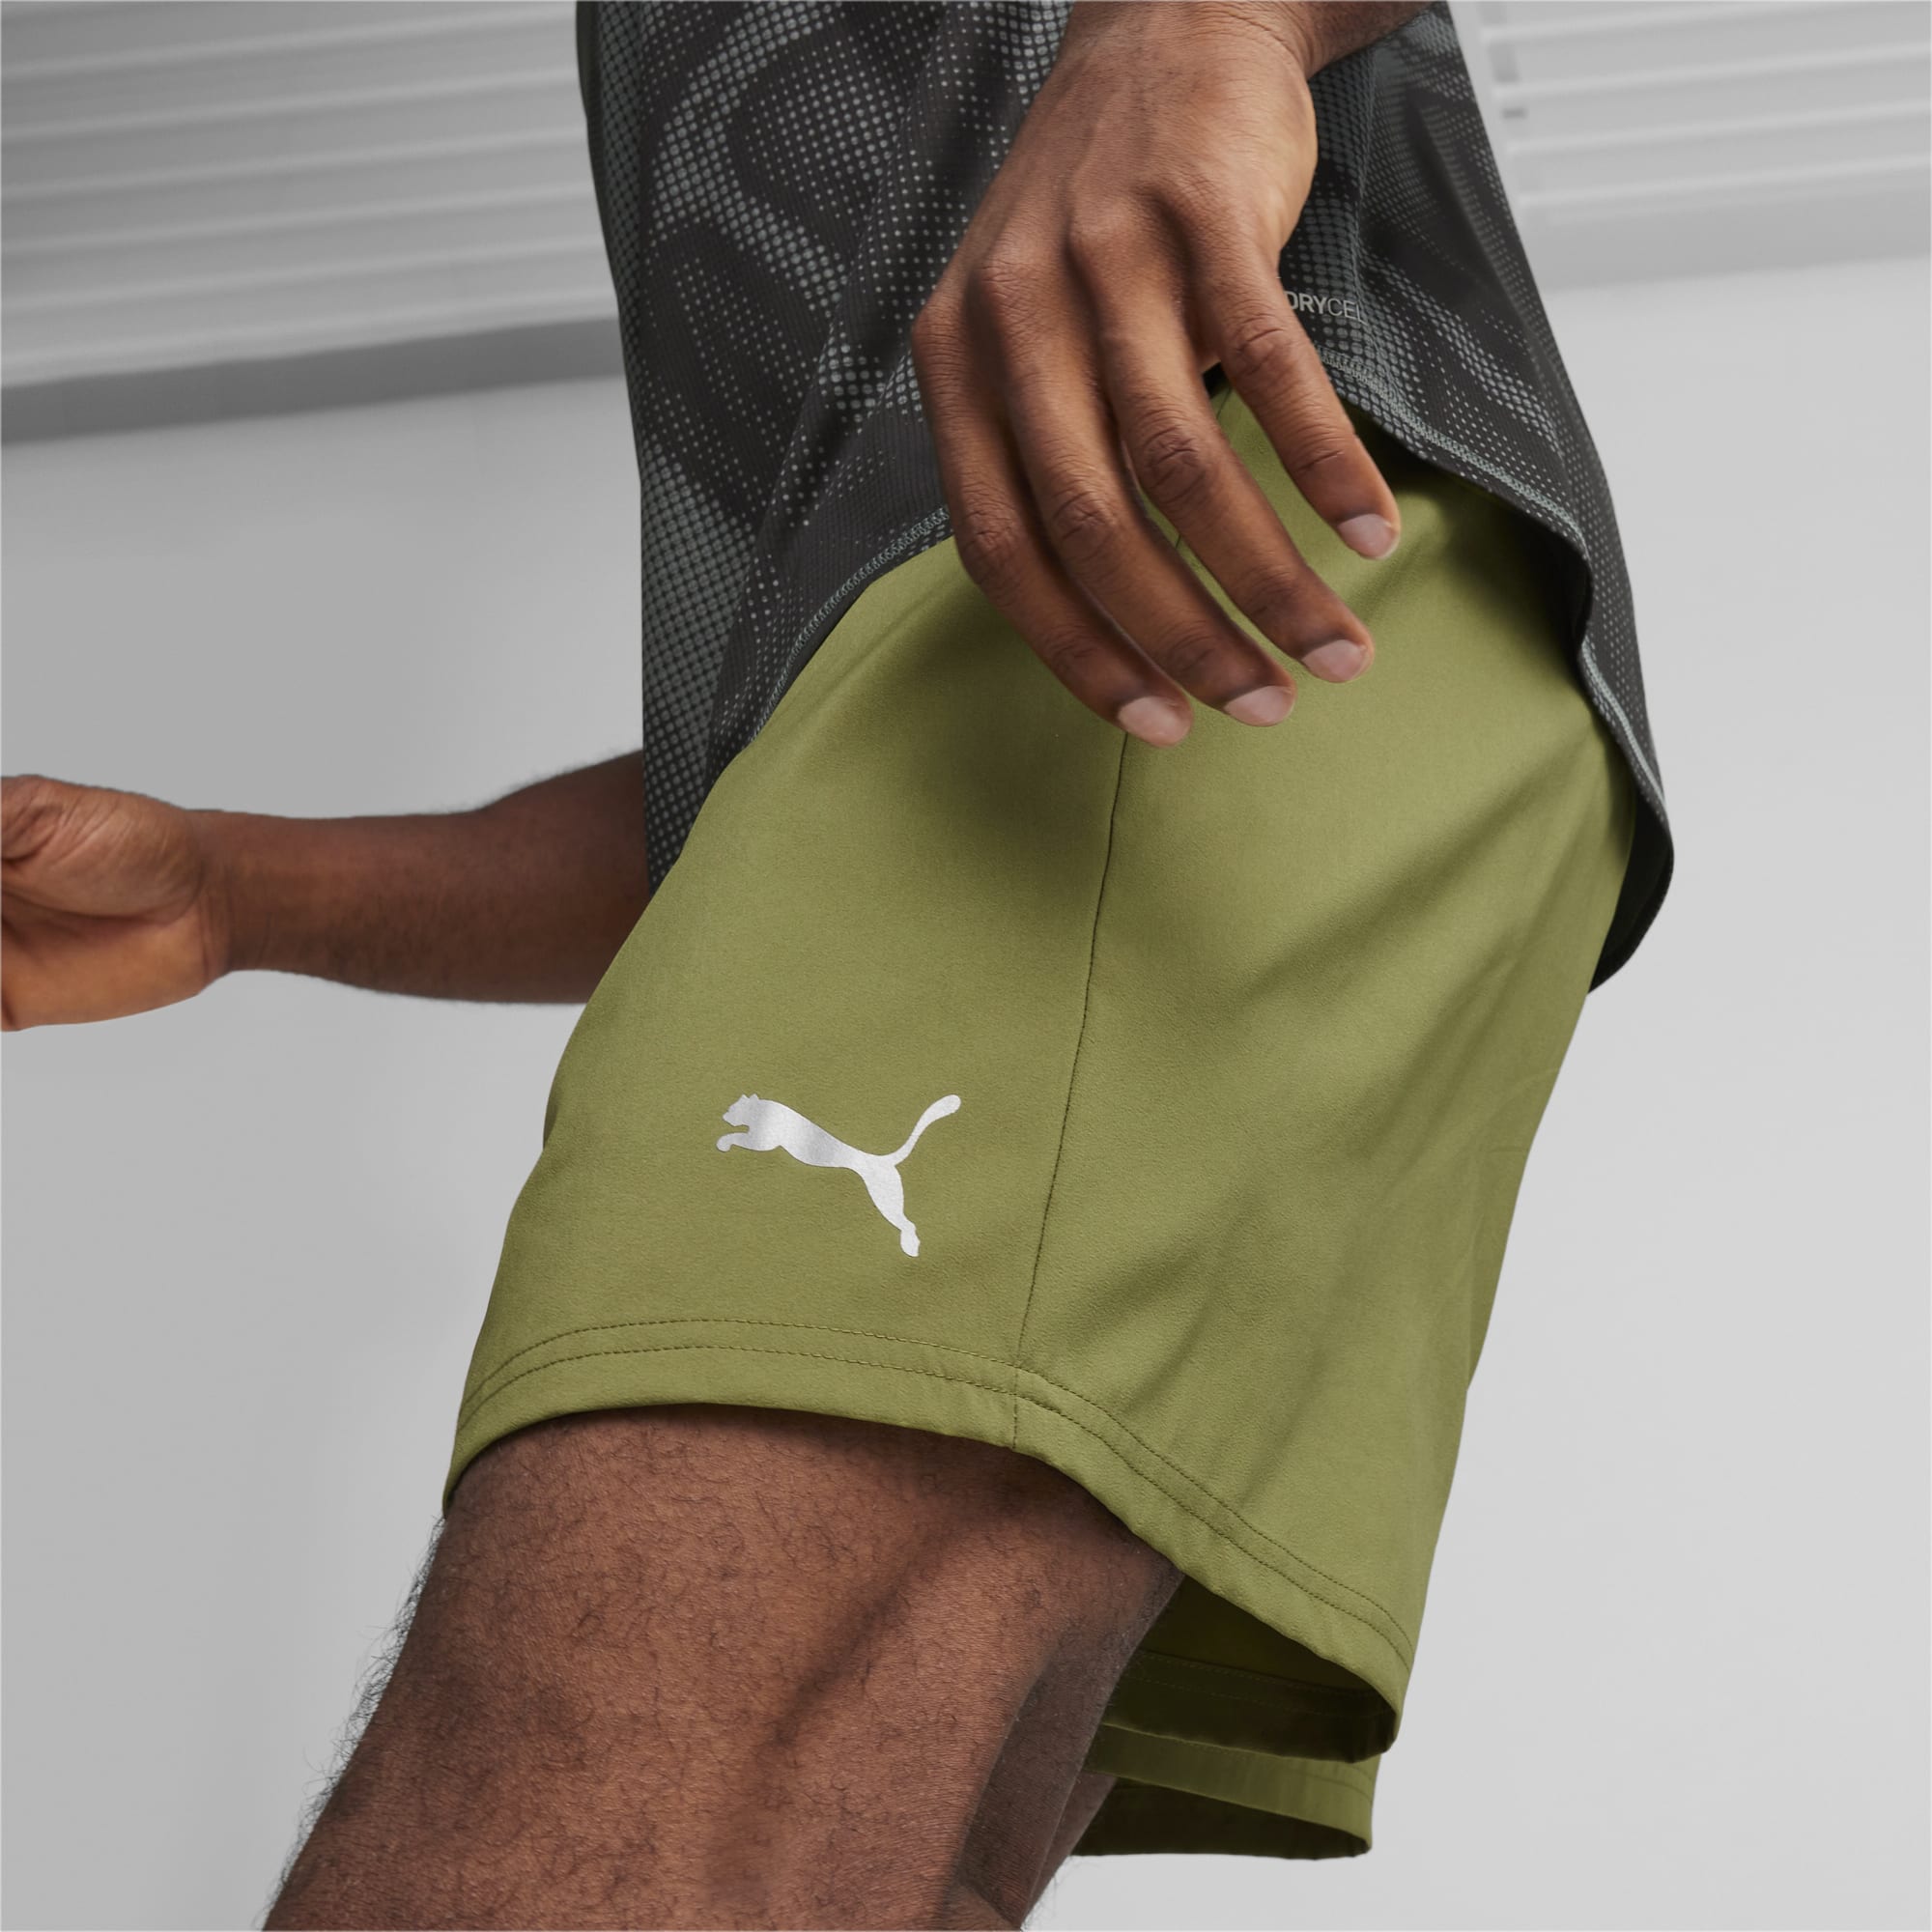 PUMA Favourite 2-in-1 Men's Running Shorts, Olive Green, Size 4XL, Clothing